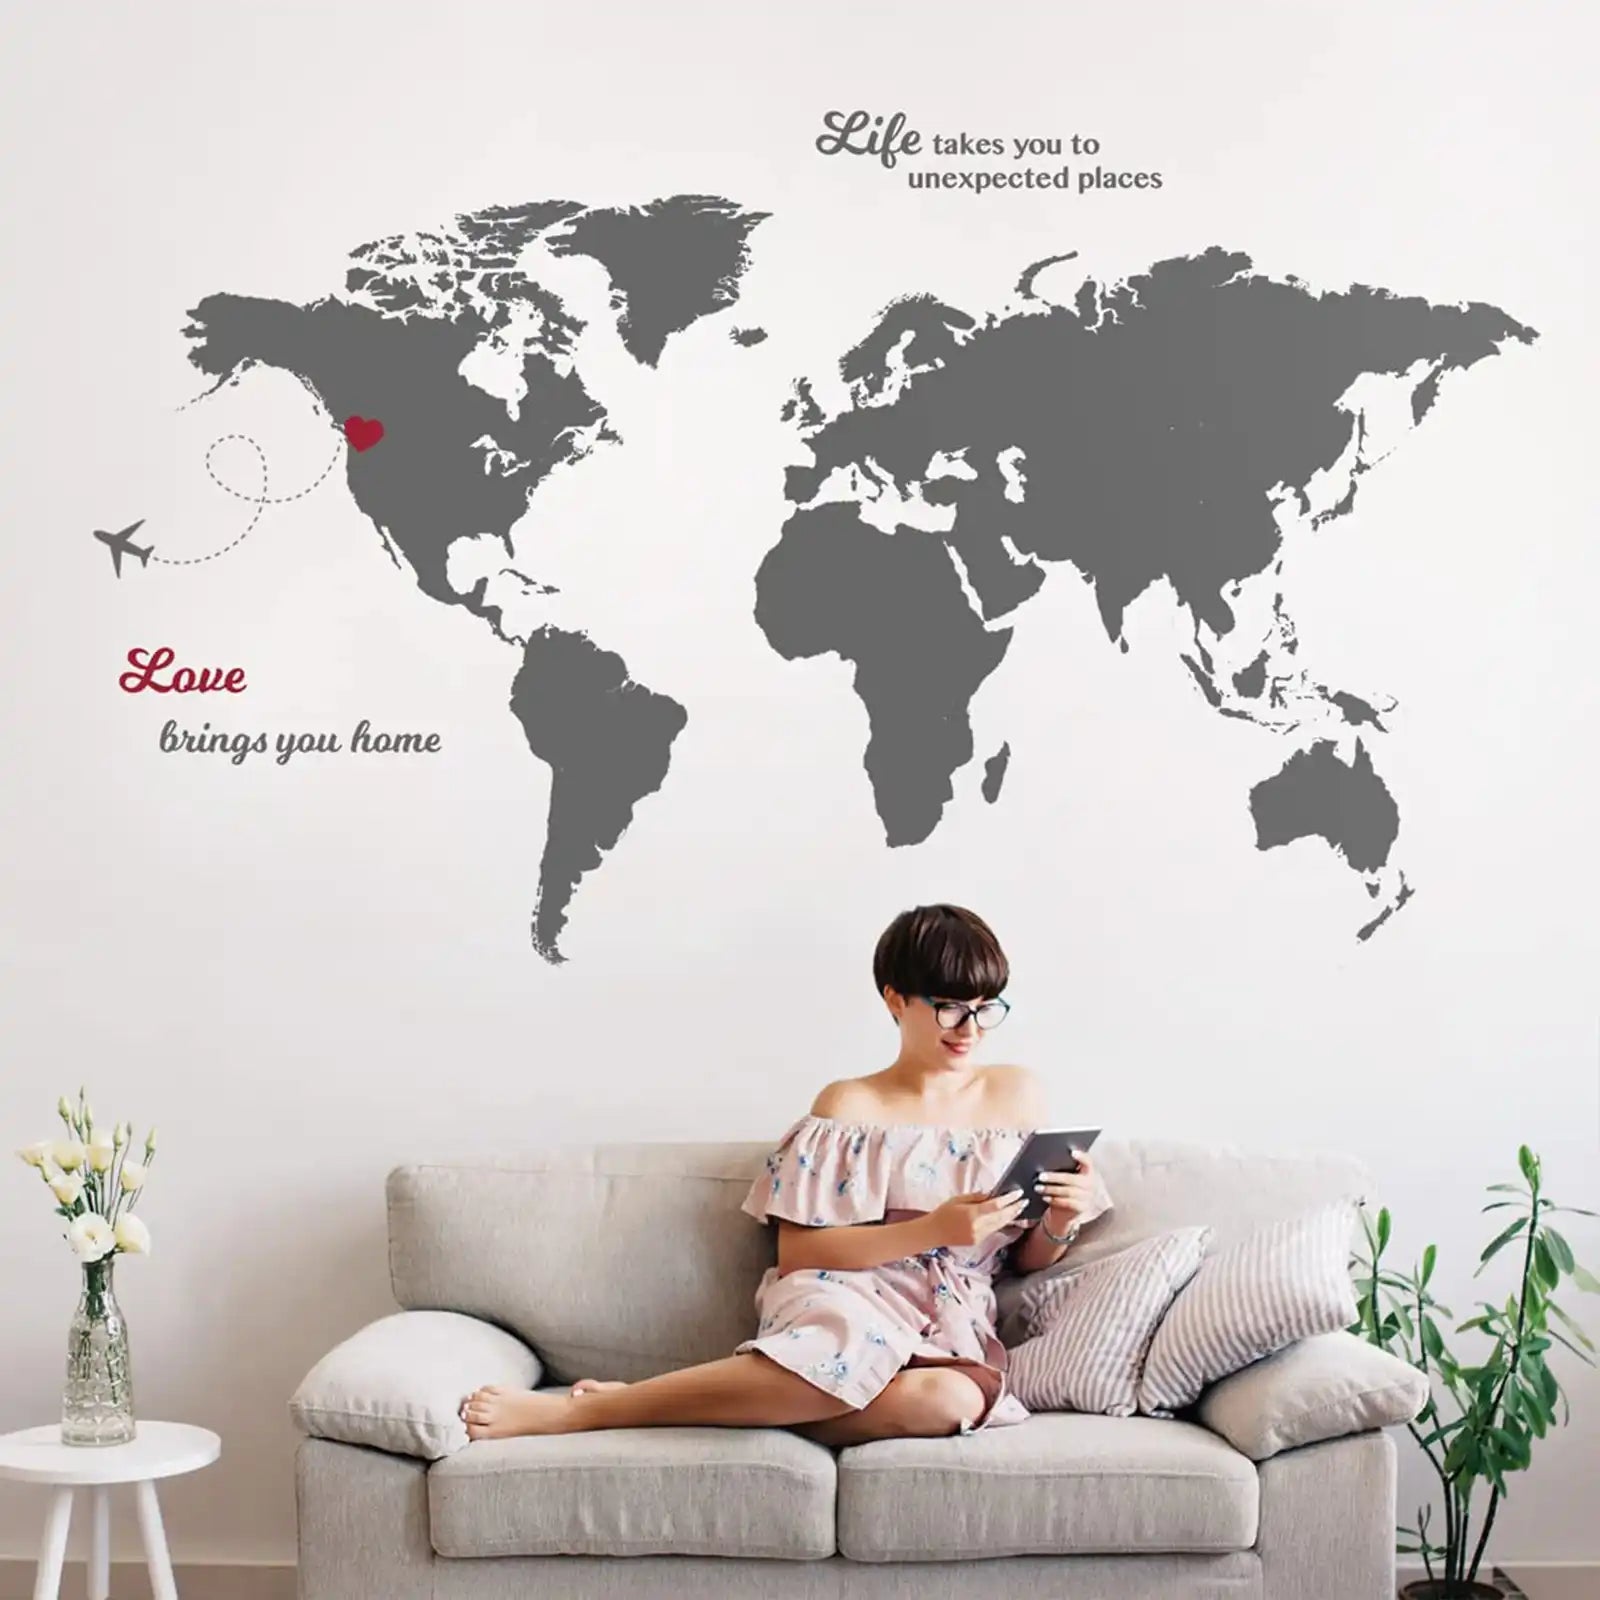 Large World Map Wall Art with Quotes – True Size World Map Decal for Travel Themed Nursery – Modern Wall Decor for Living Room, Bedroom, Office & Dorm – Vintage World Map Stickers